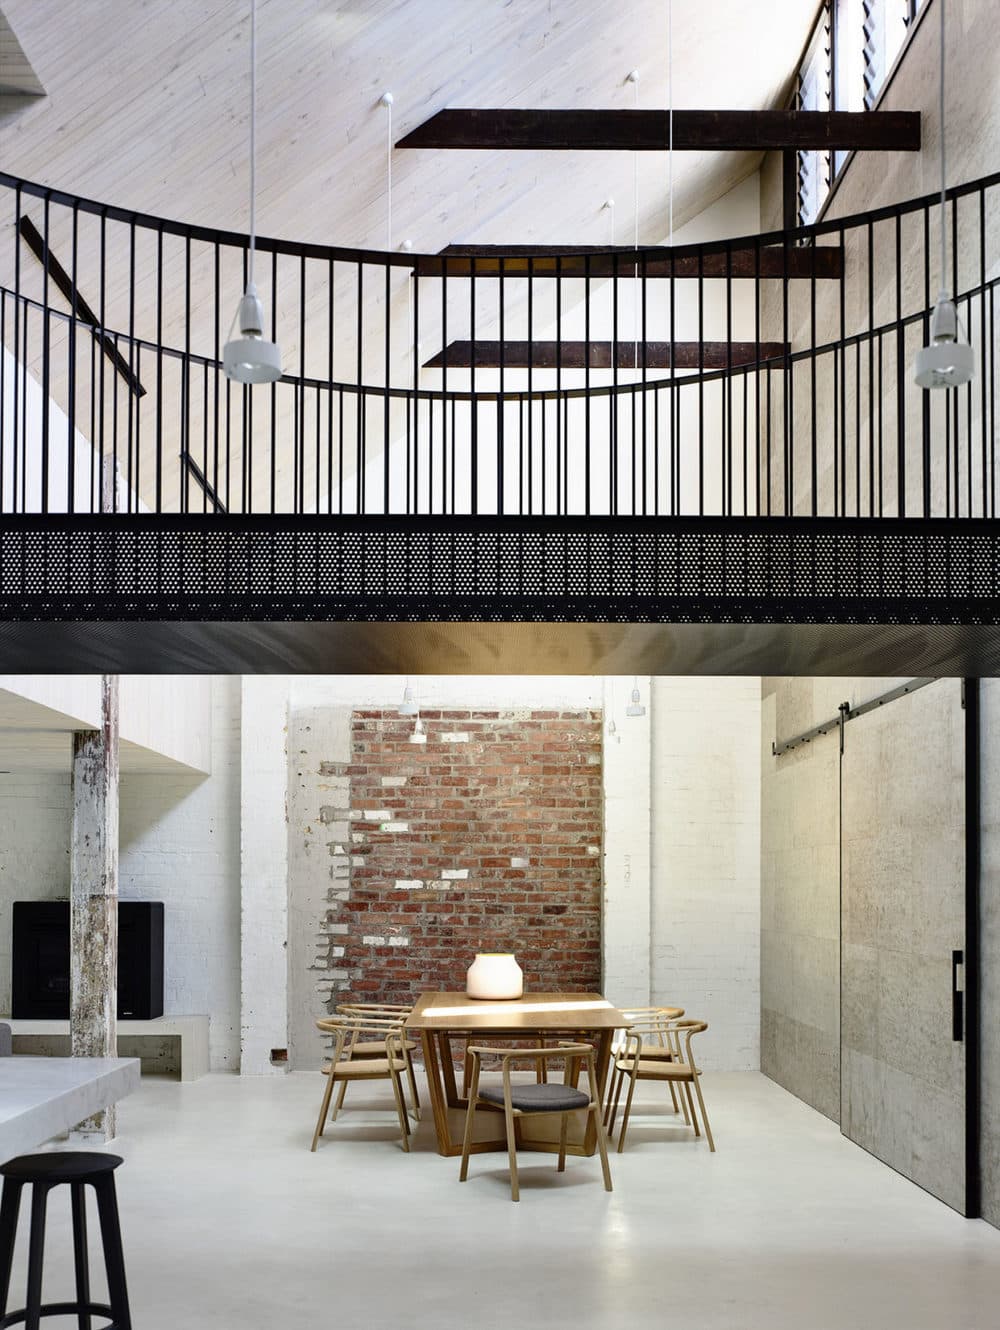 Conversion of an old industrial warehouse, Architects EAT